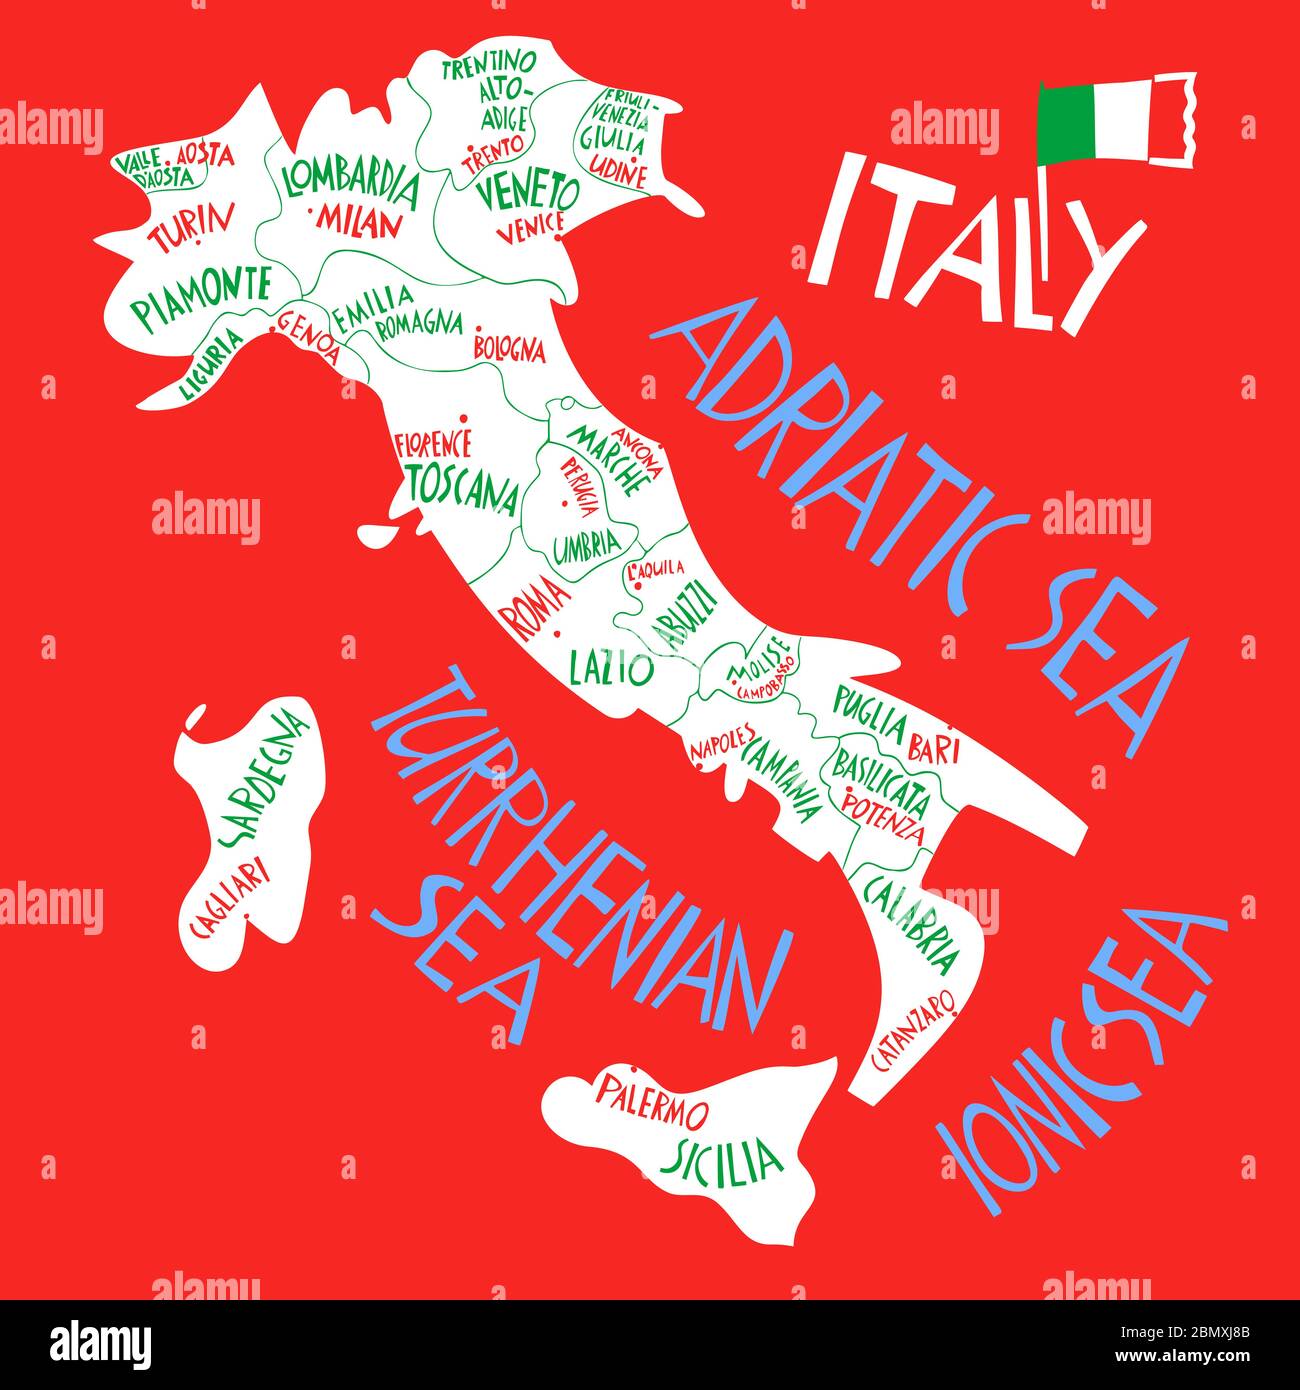 Vector hand drawn stylized map of Italian Republic. Travel illustration of Italy provinces and cities. Hand drawn lettering illustration. Europe medit Stock Vector